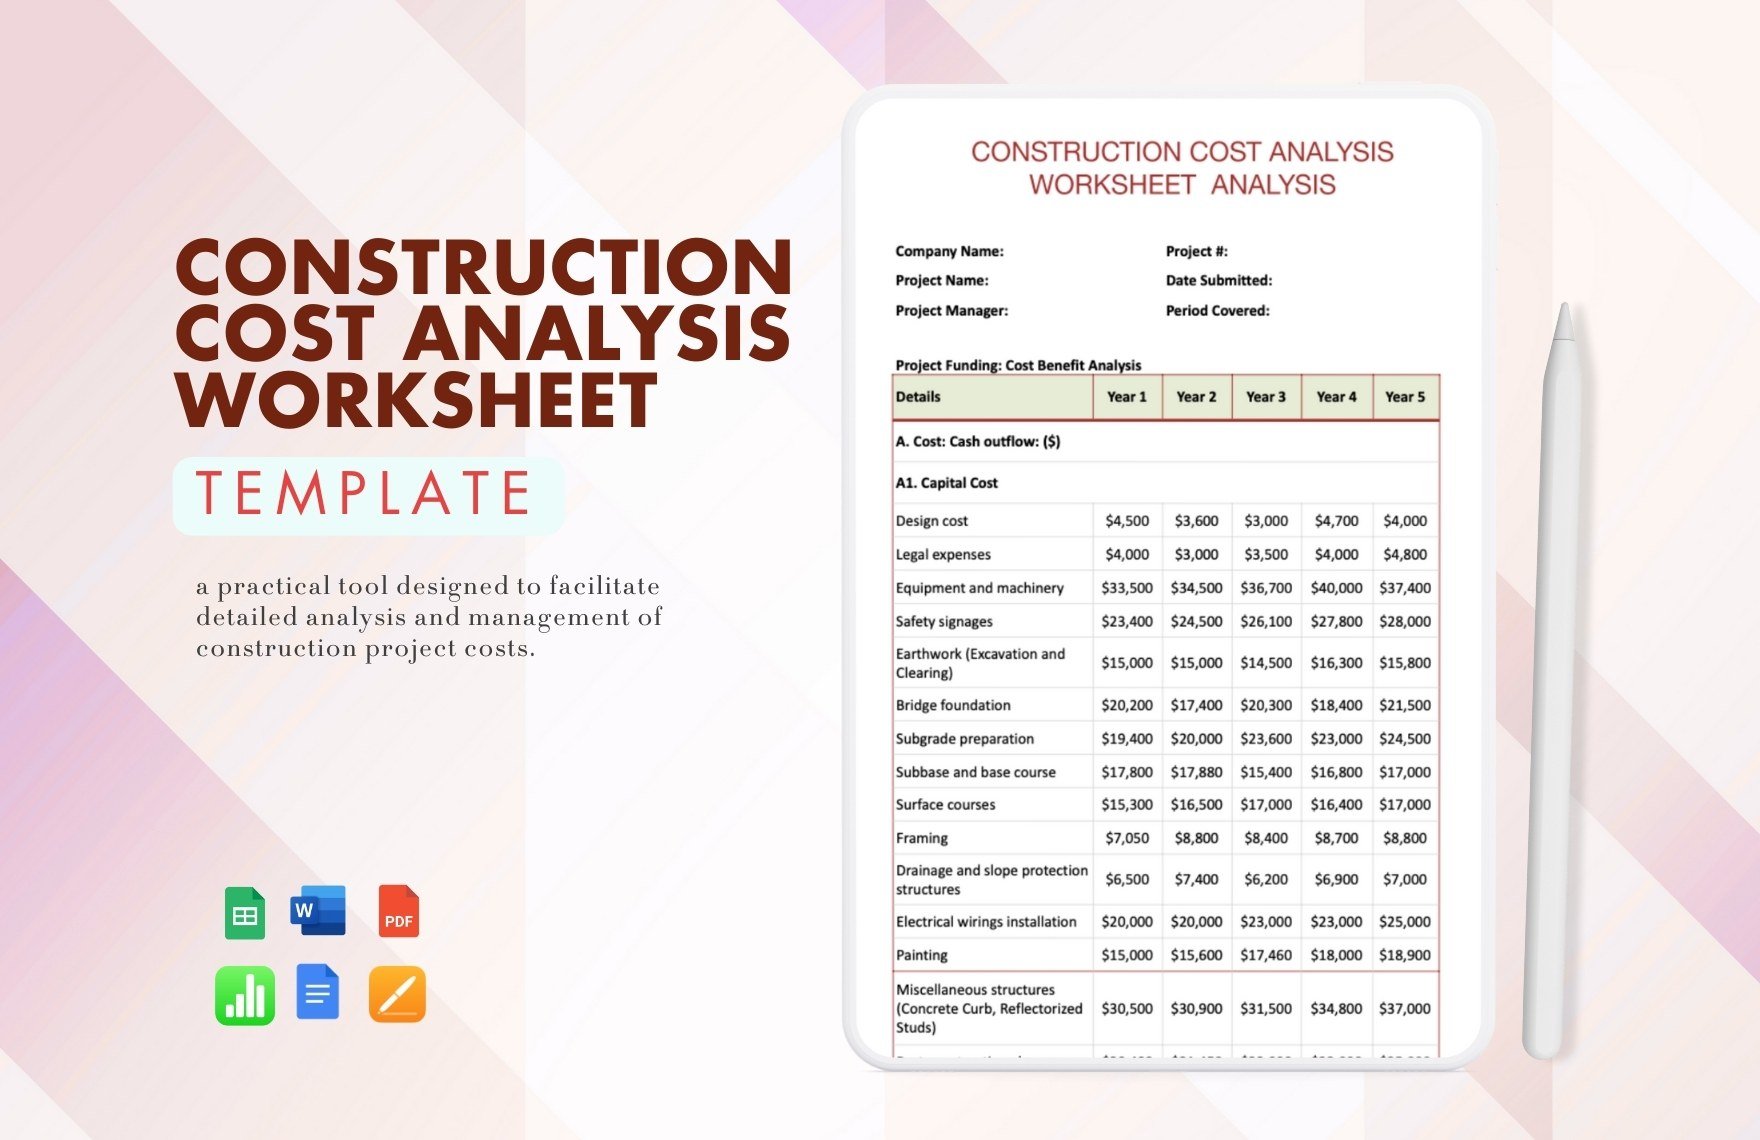 Construction Cost Analysis Worksheet Template in Word, Google Docs, Google Sheets, Apple Pages, Apple Numbers